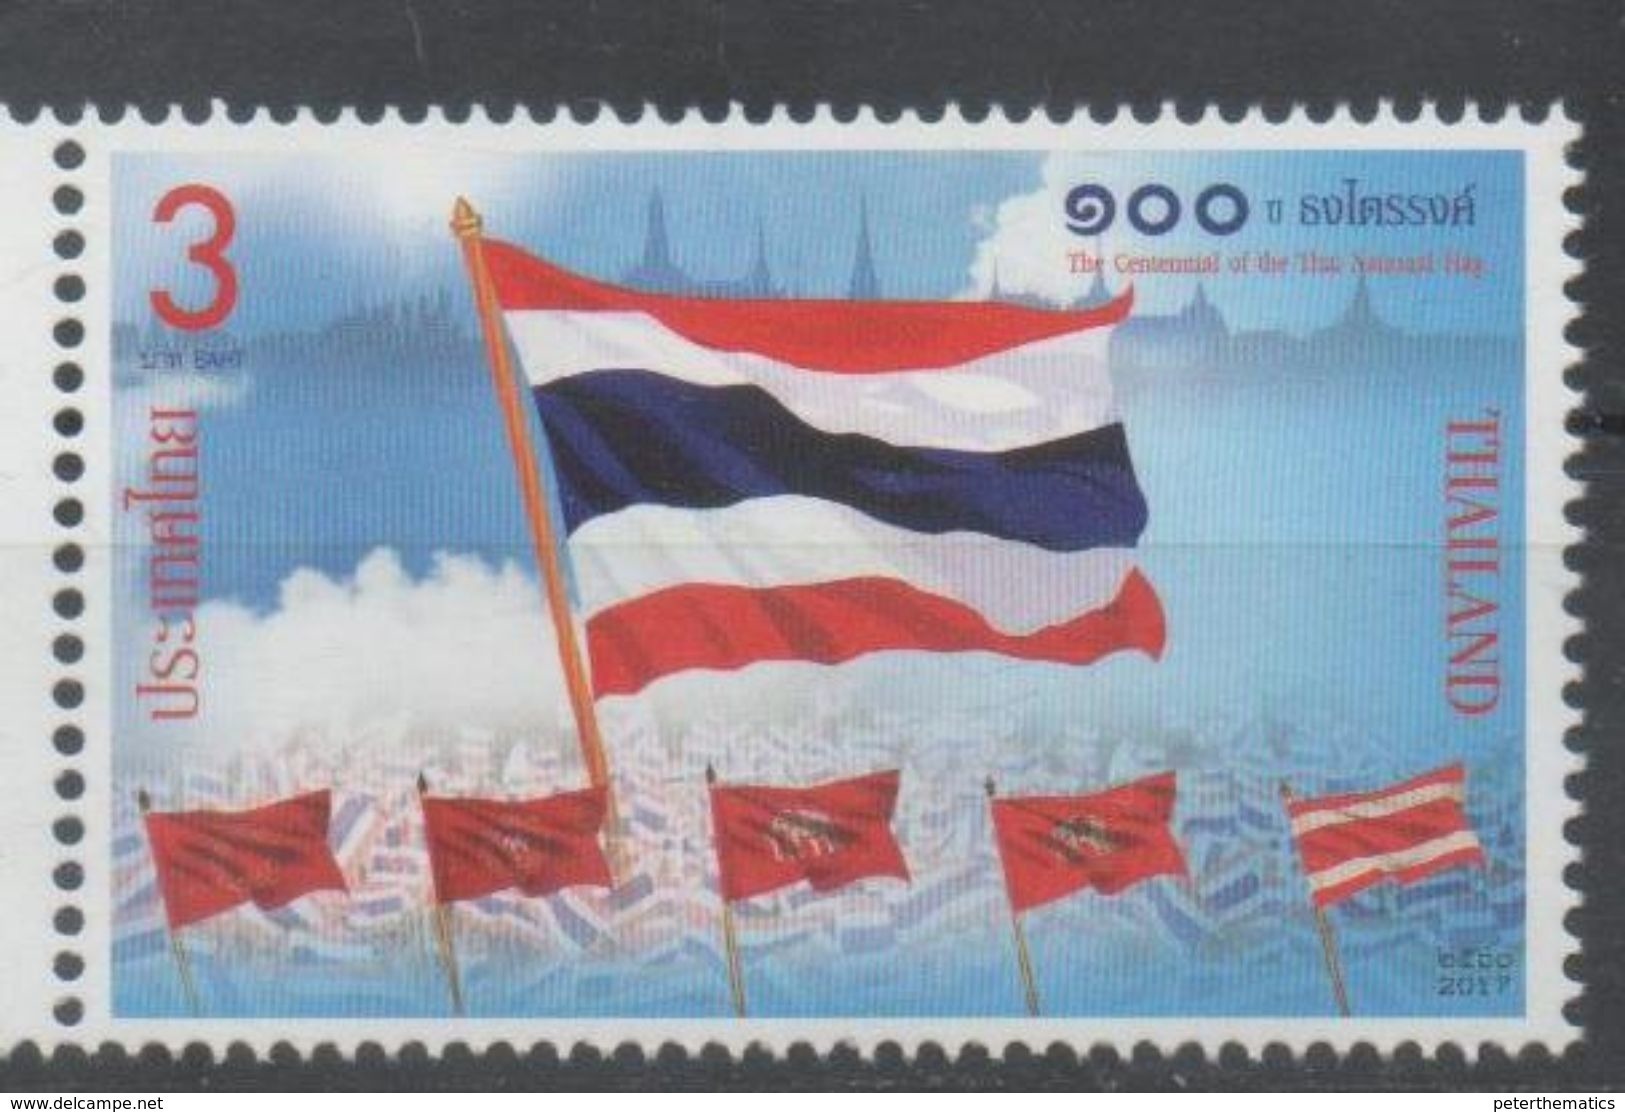 THAILAND, 2017, MNH, FLAGS, CENTENIAL OF THE THAI FLAG ,1v - Timbres